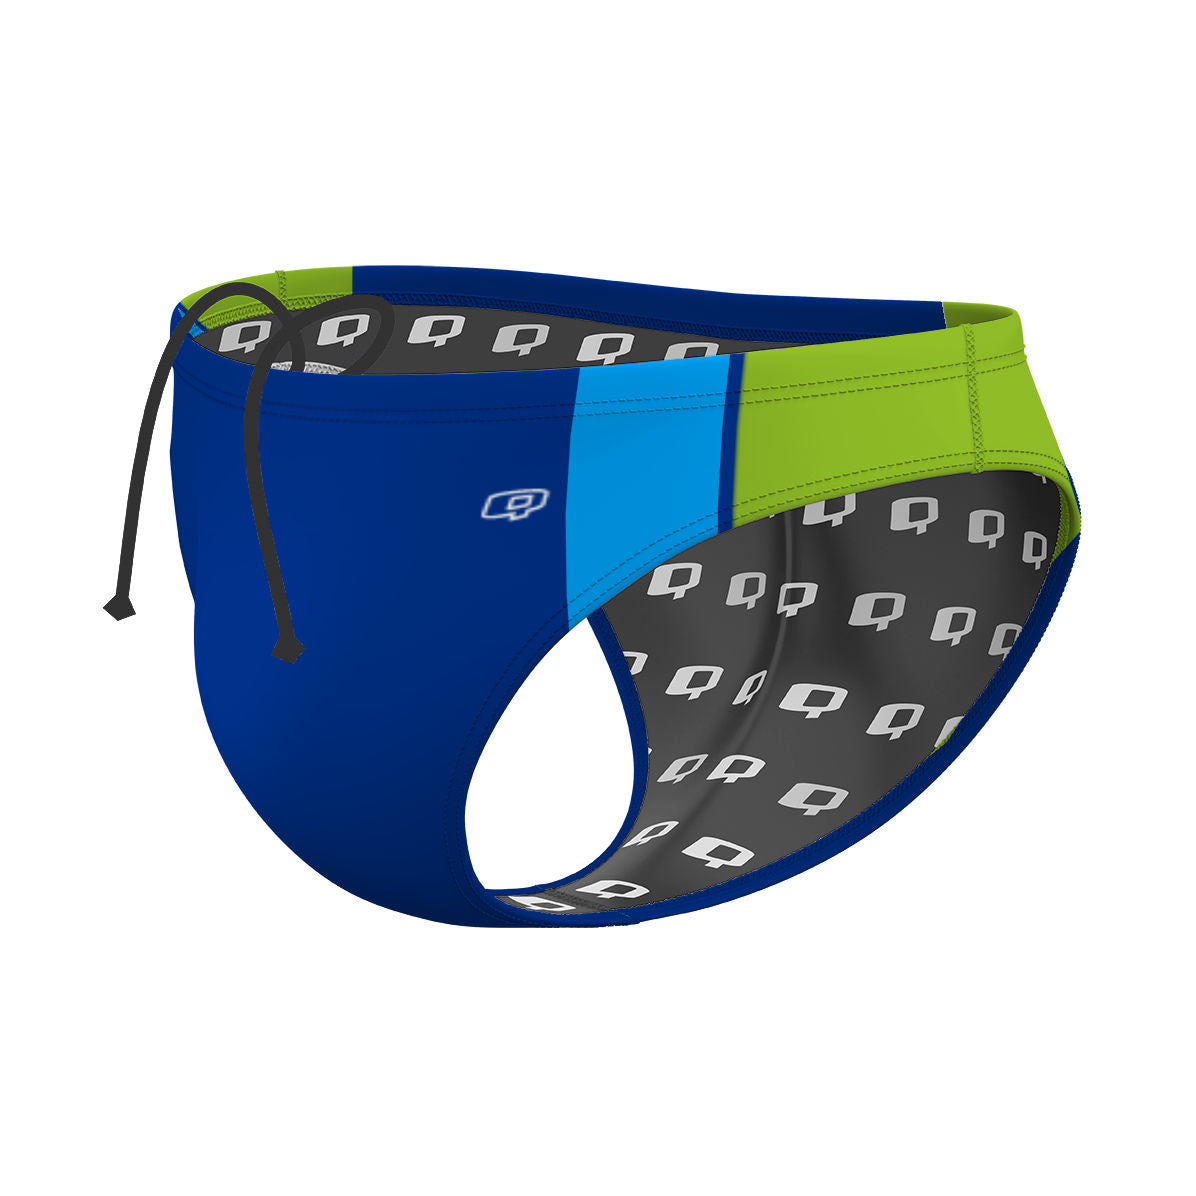 Blues and Green - Waterpolo Brief Swimsuit